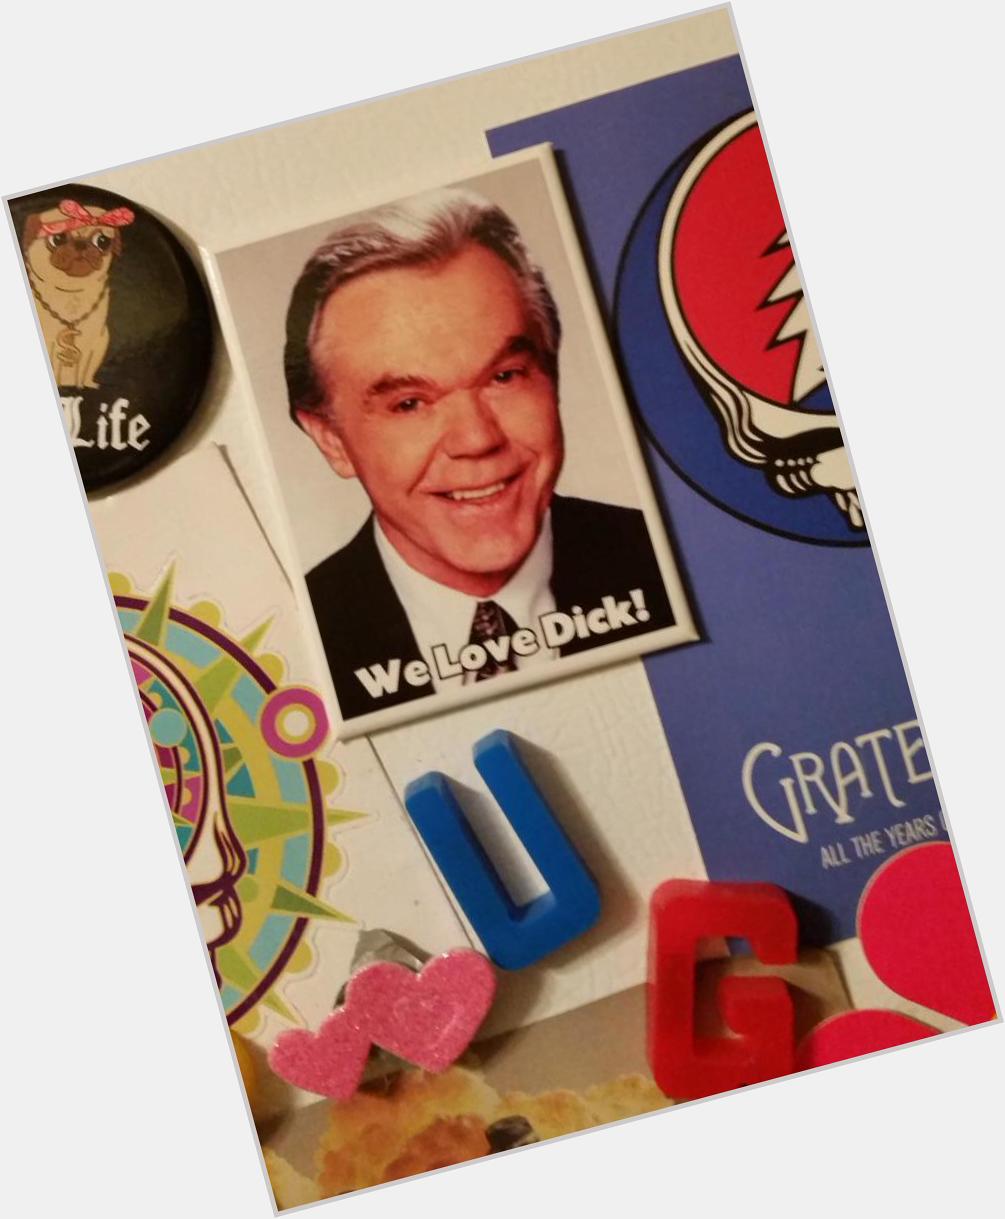 Happy birthday to the best weather man ever! Fellow star gazer & animal protector... Cleveland\s own, Dick Goddard. 